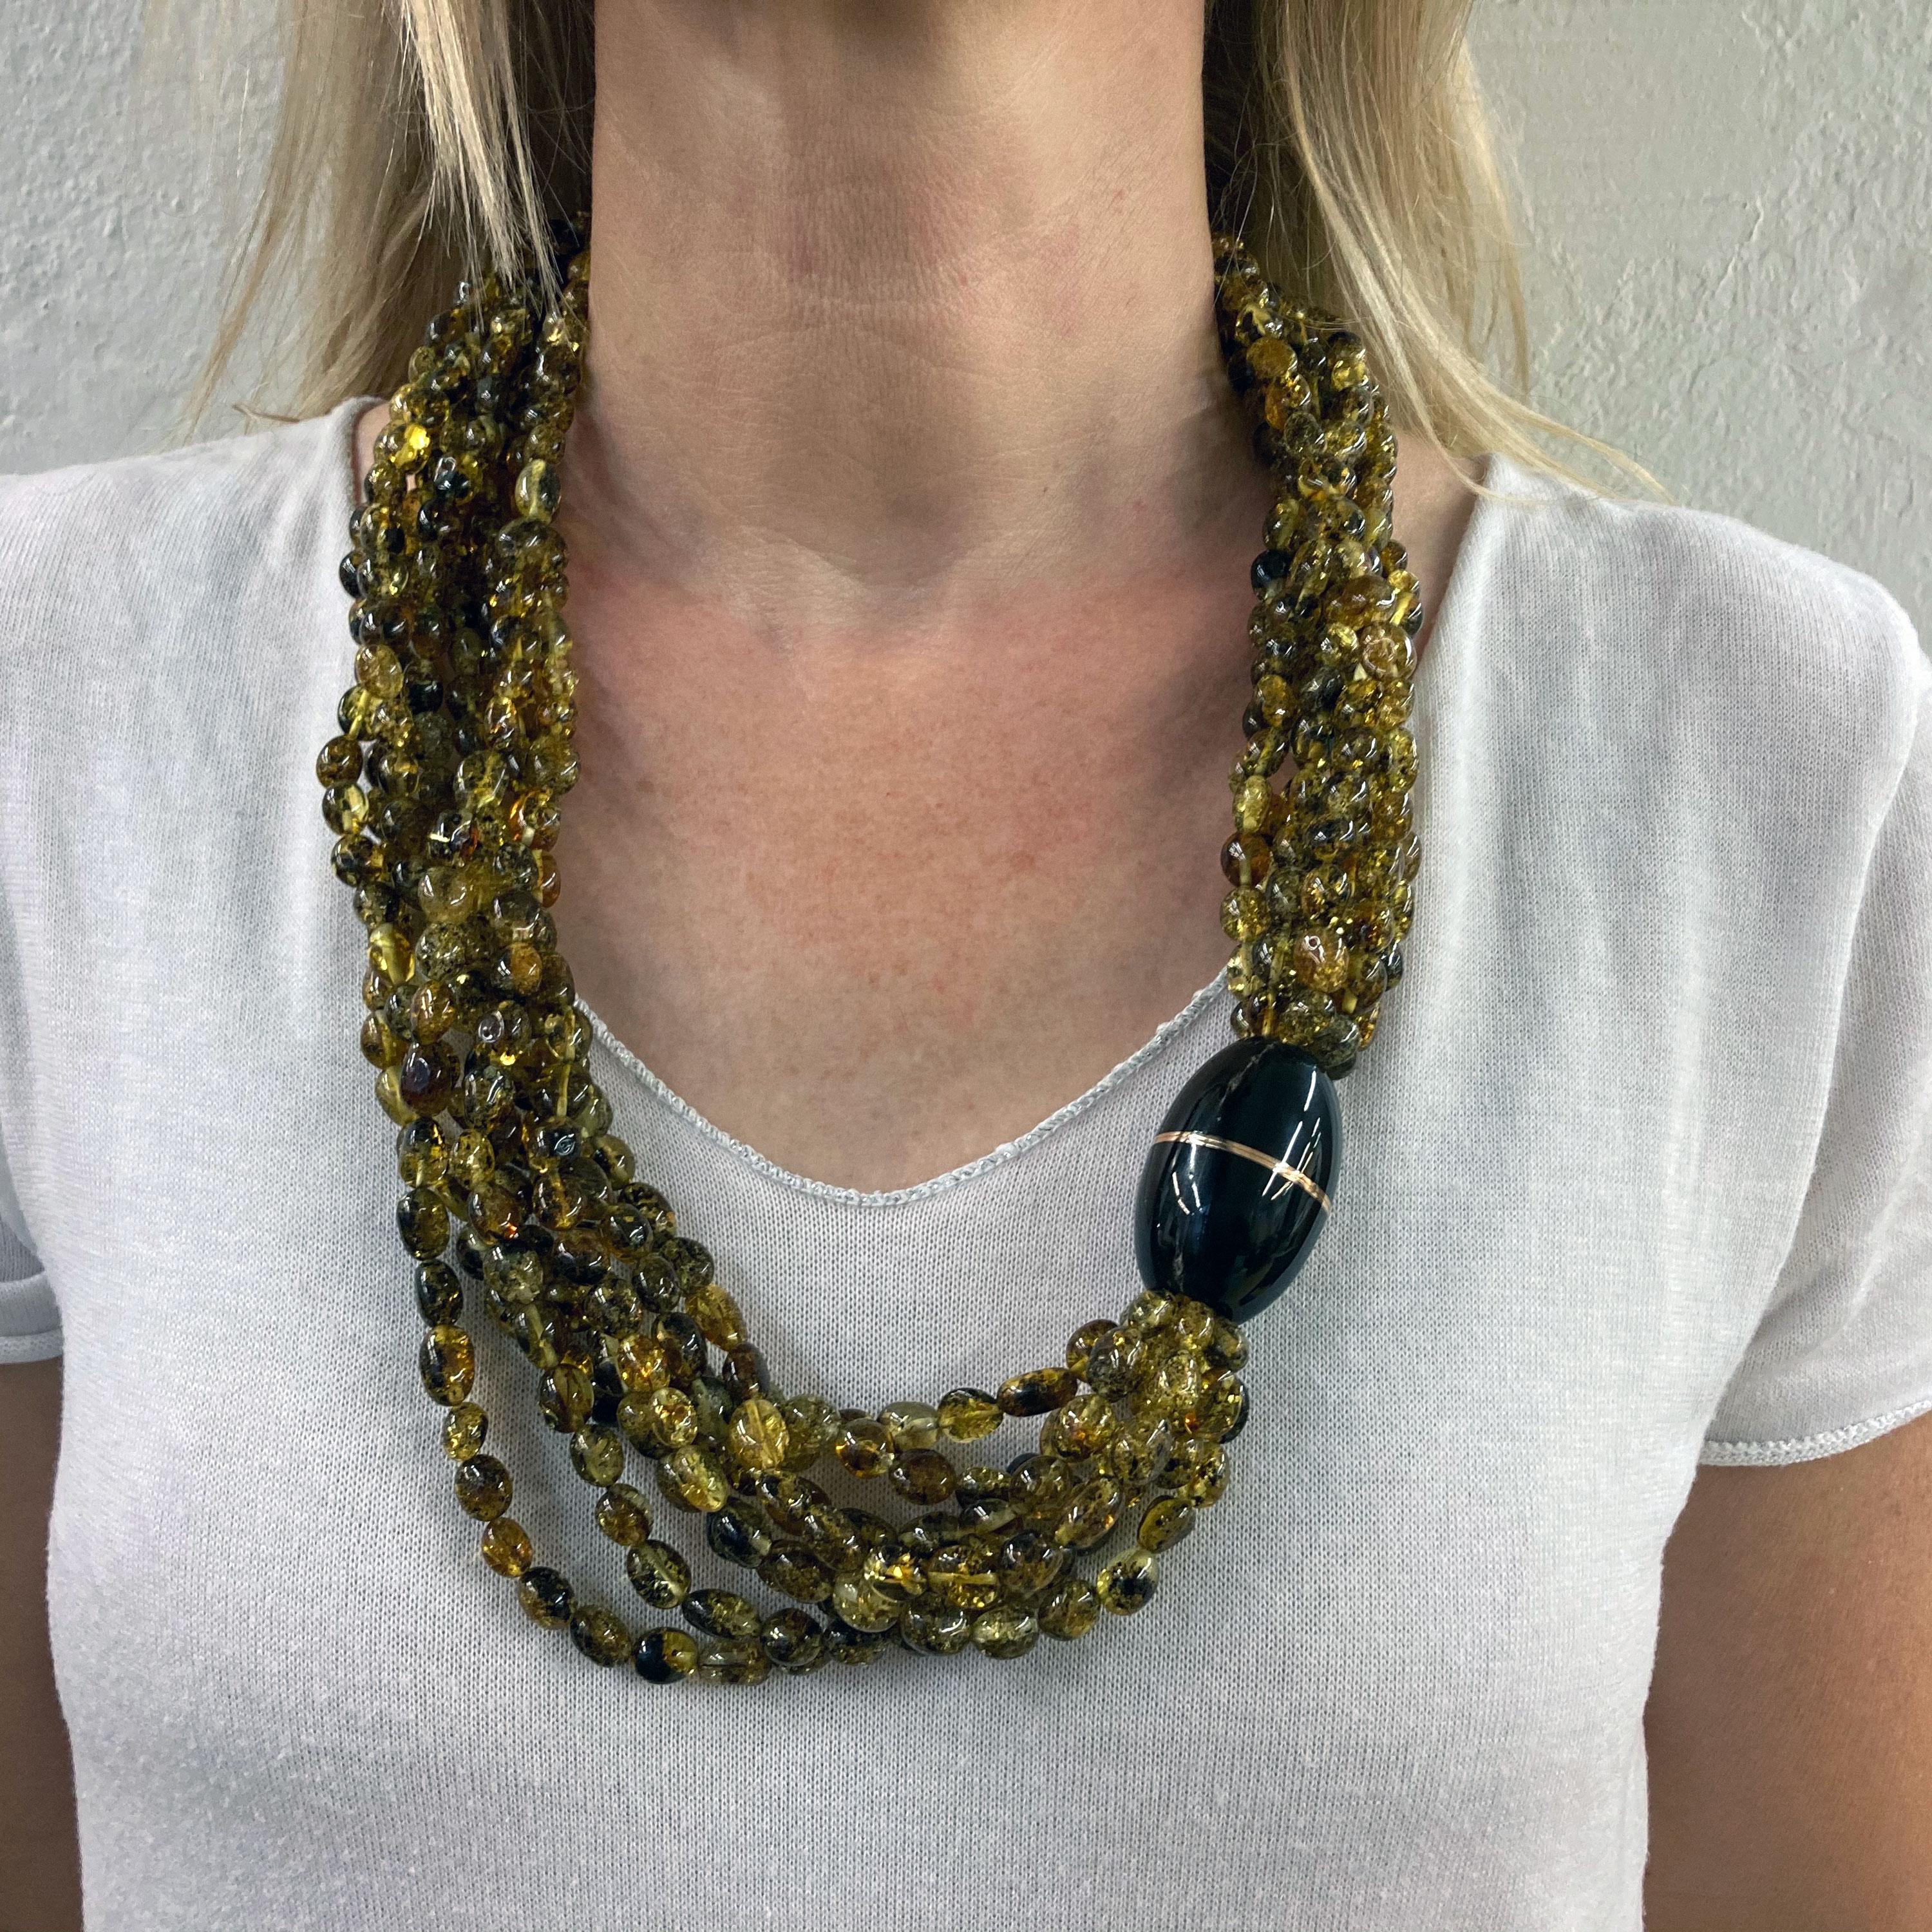 This outstanding 8 row necklace intrigues with the warm colors of the greenish yellow - brown Amber beads. The magnetic Closure is crafted in 18 Kt rose Gold and black Horn.
Although being very imporatant in size it is very comfortable to wear due